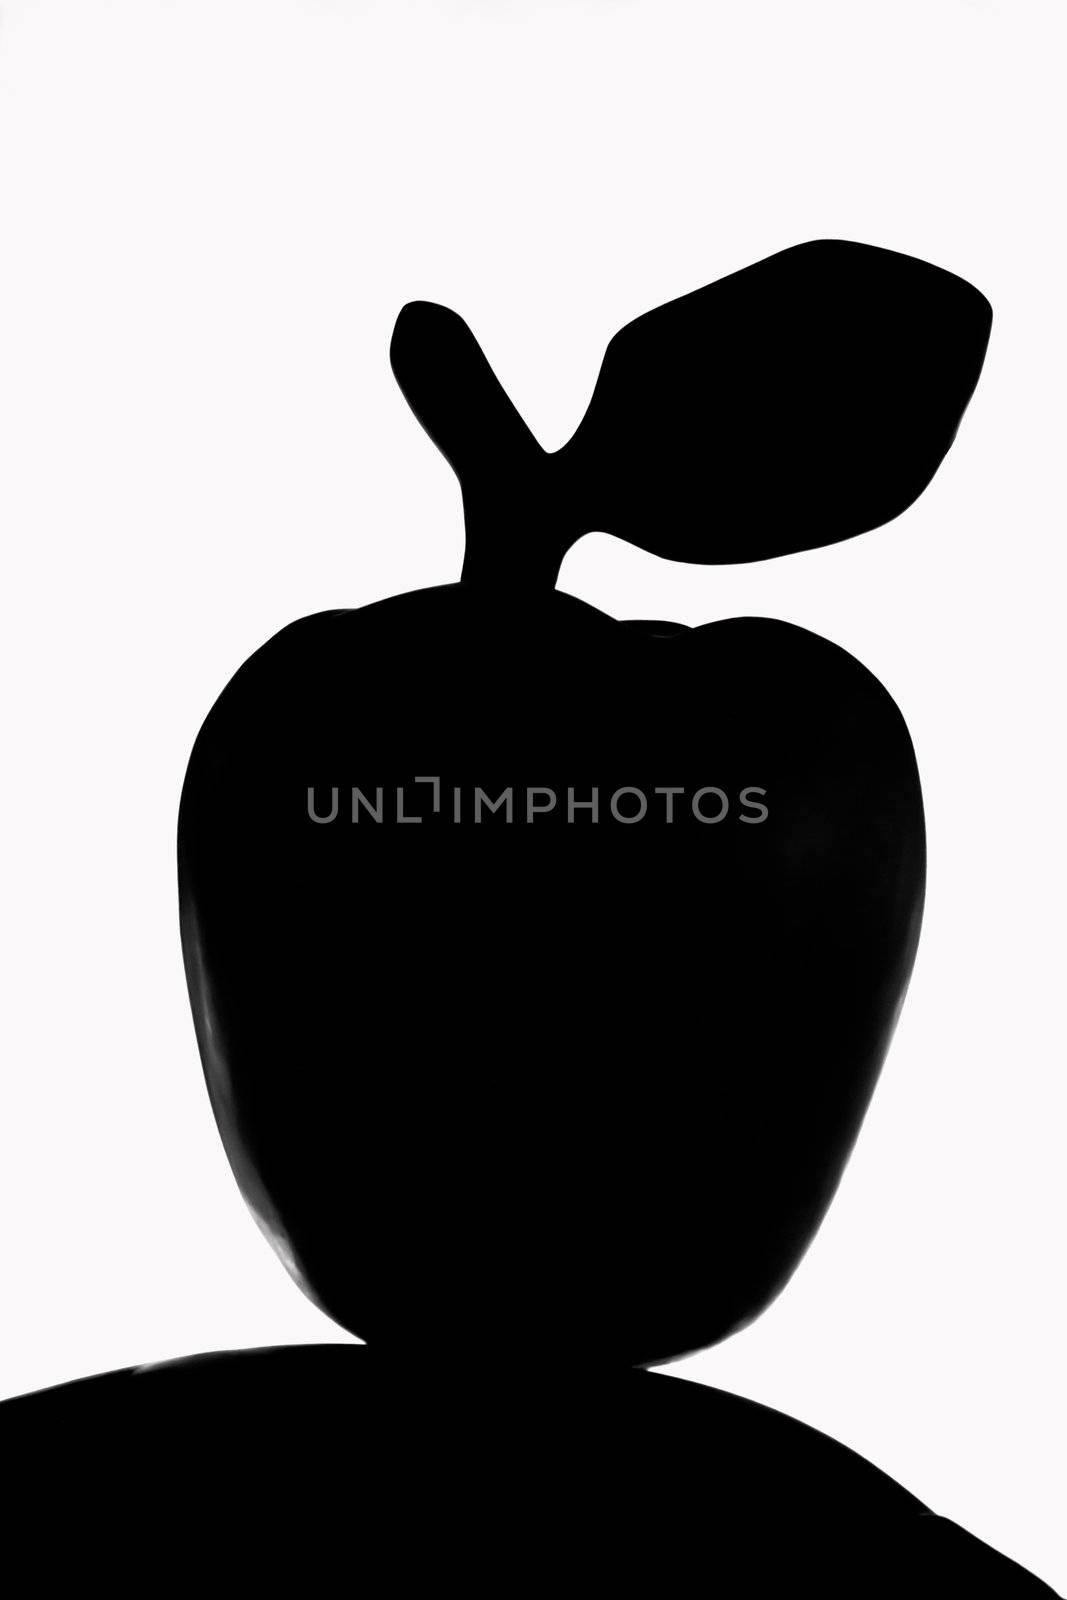 Silhouette of the apple by kasto